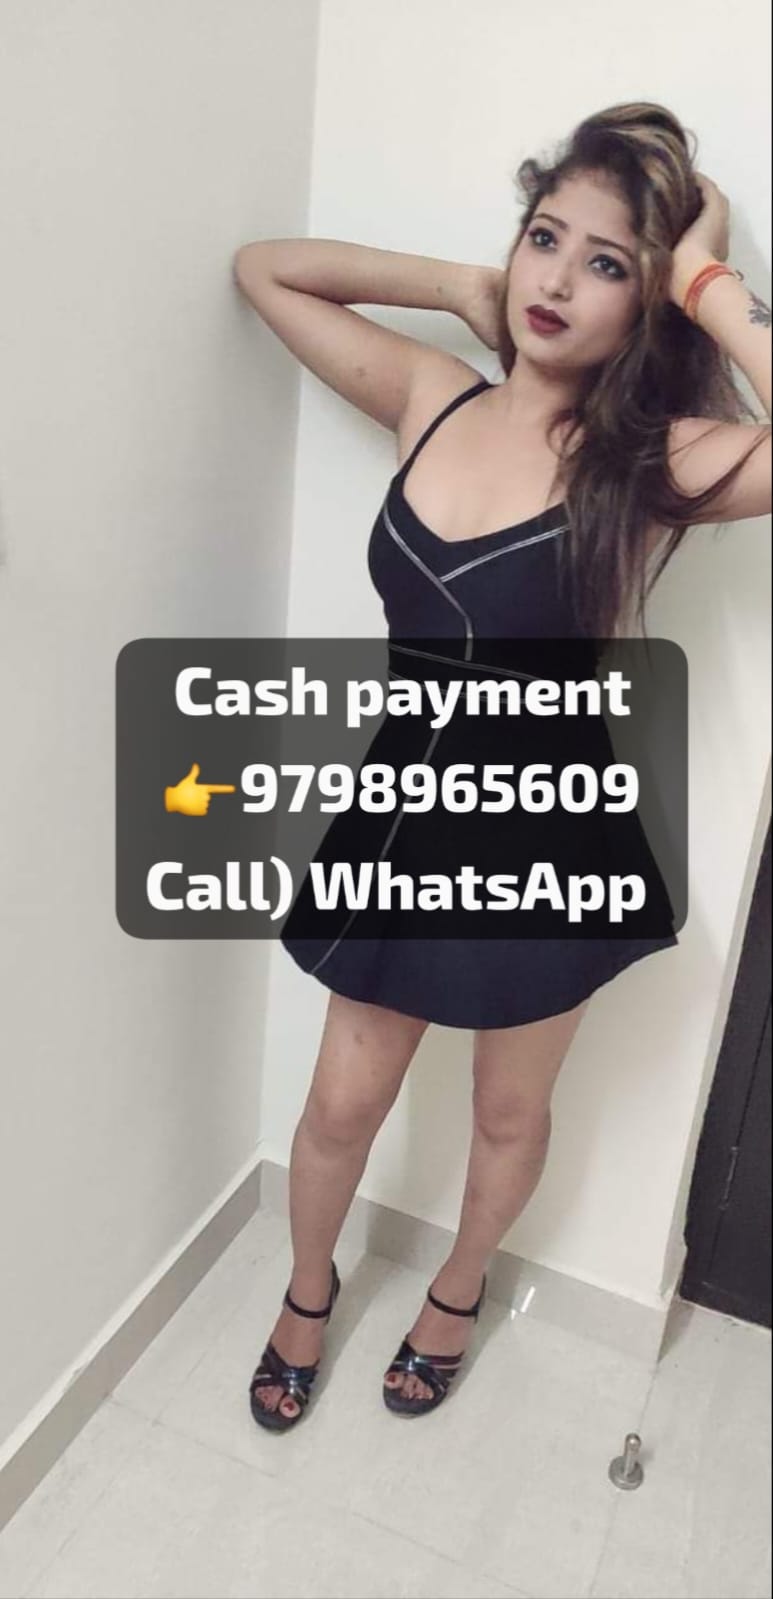 Pimpri chinchwad in VIP model college girl available anytime 